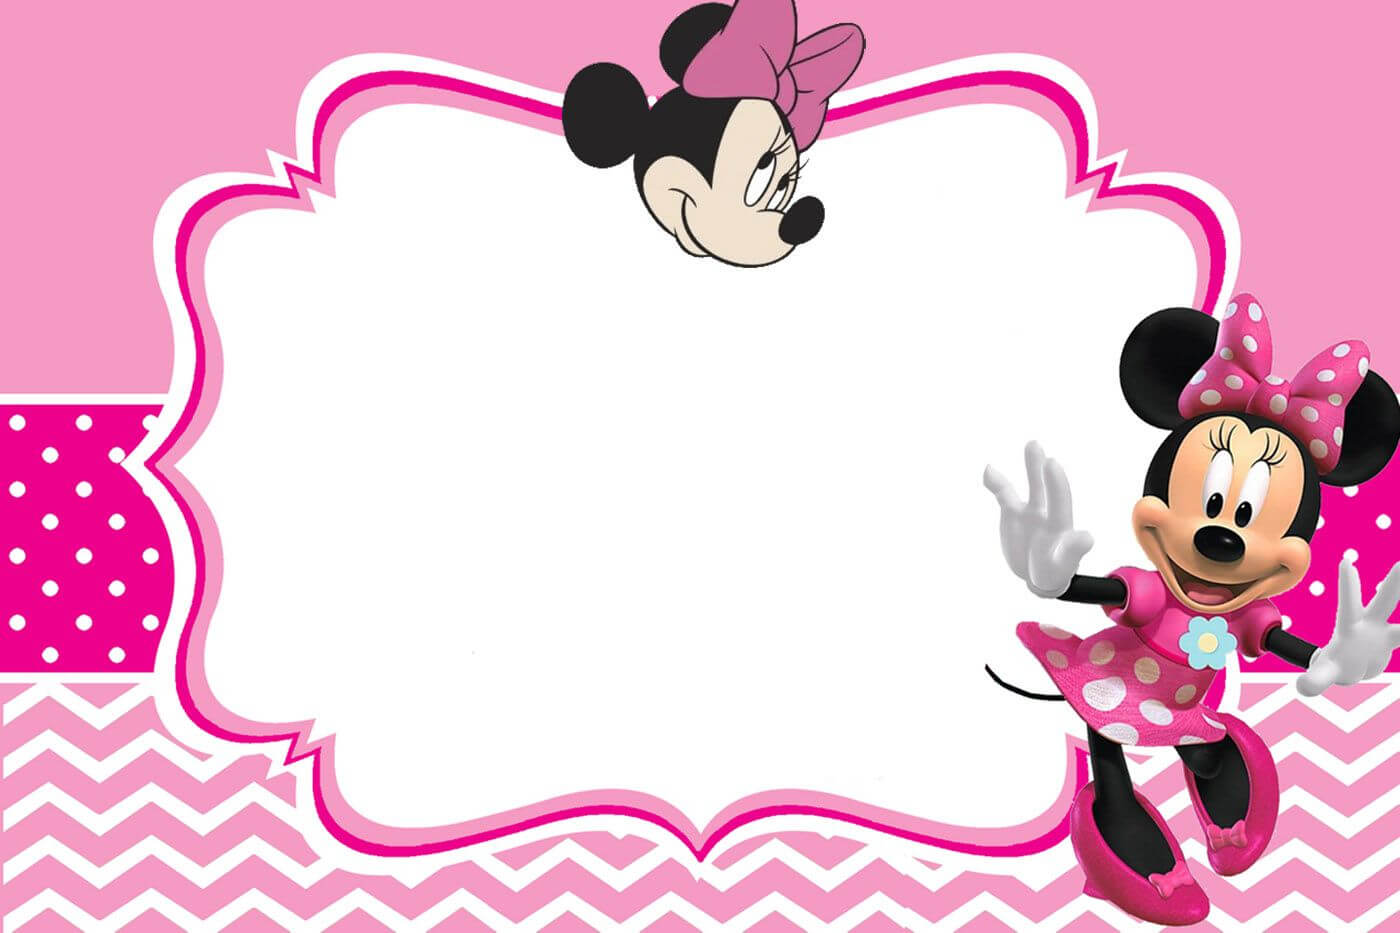 Minnie Mouse Invitation Card Design | Mickey Mouse Inside Minnie Mouse Card Templates